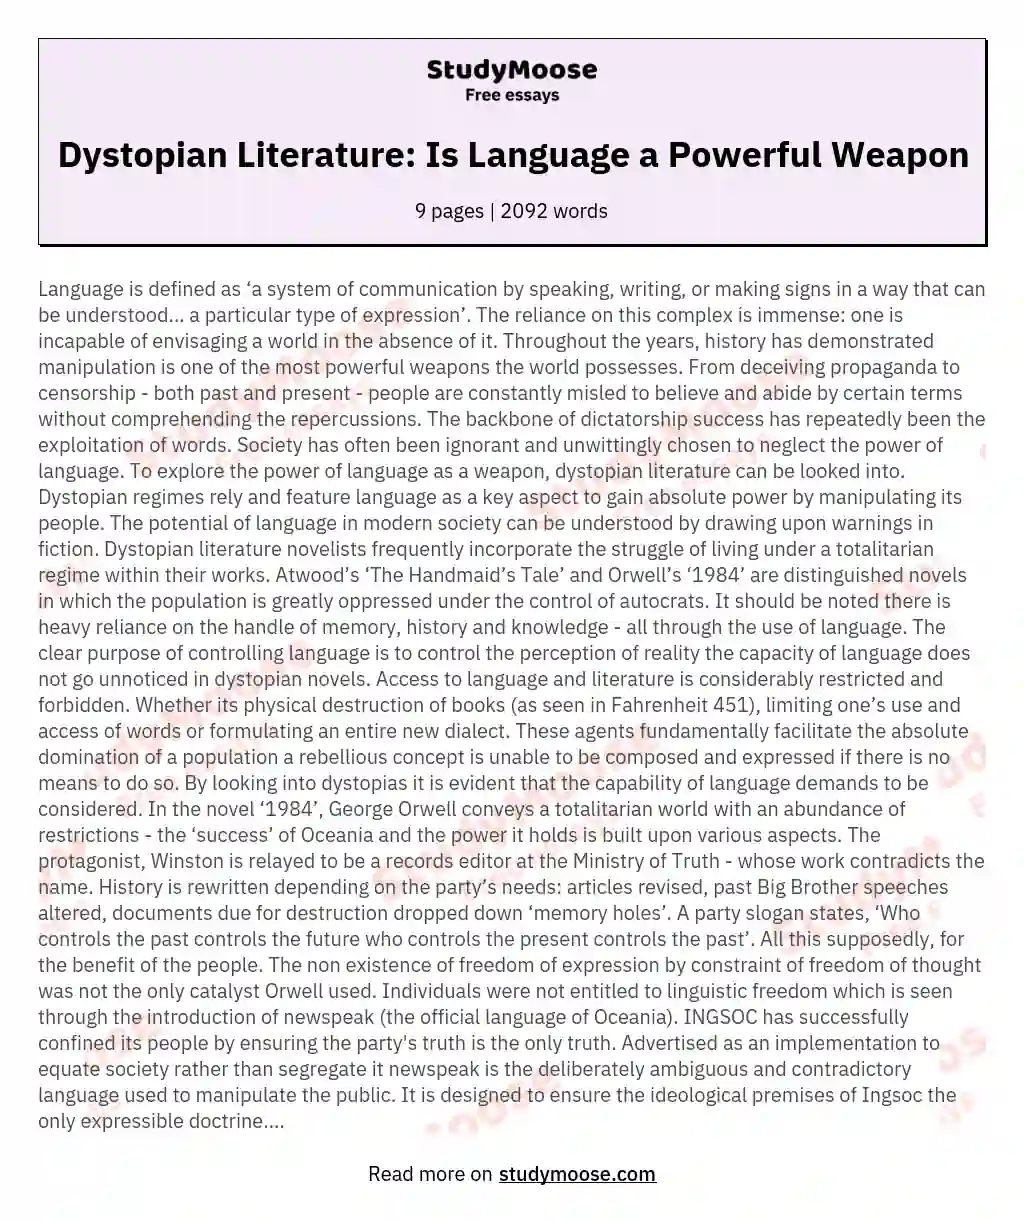 Dystopian Literature: Is Language a Powerful Weapon